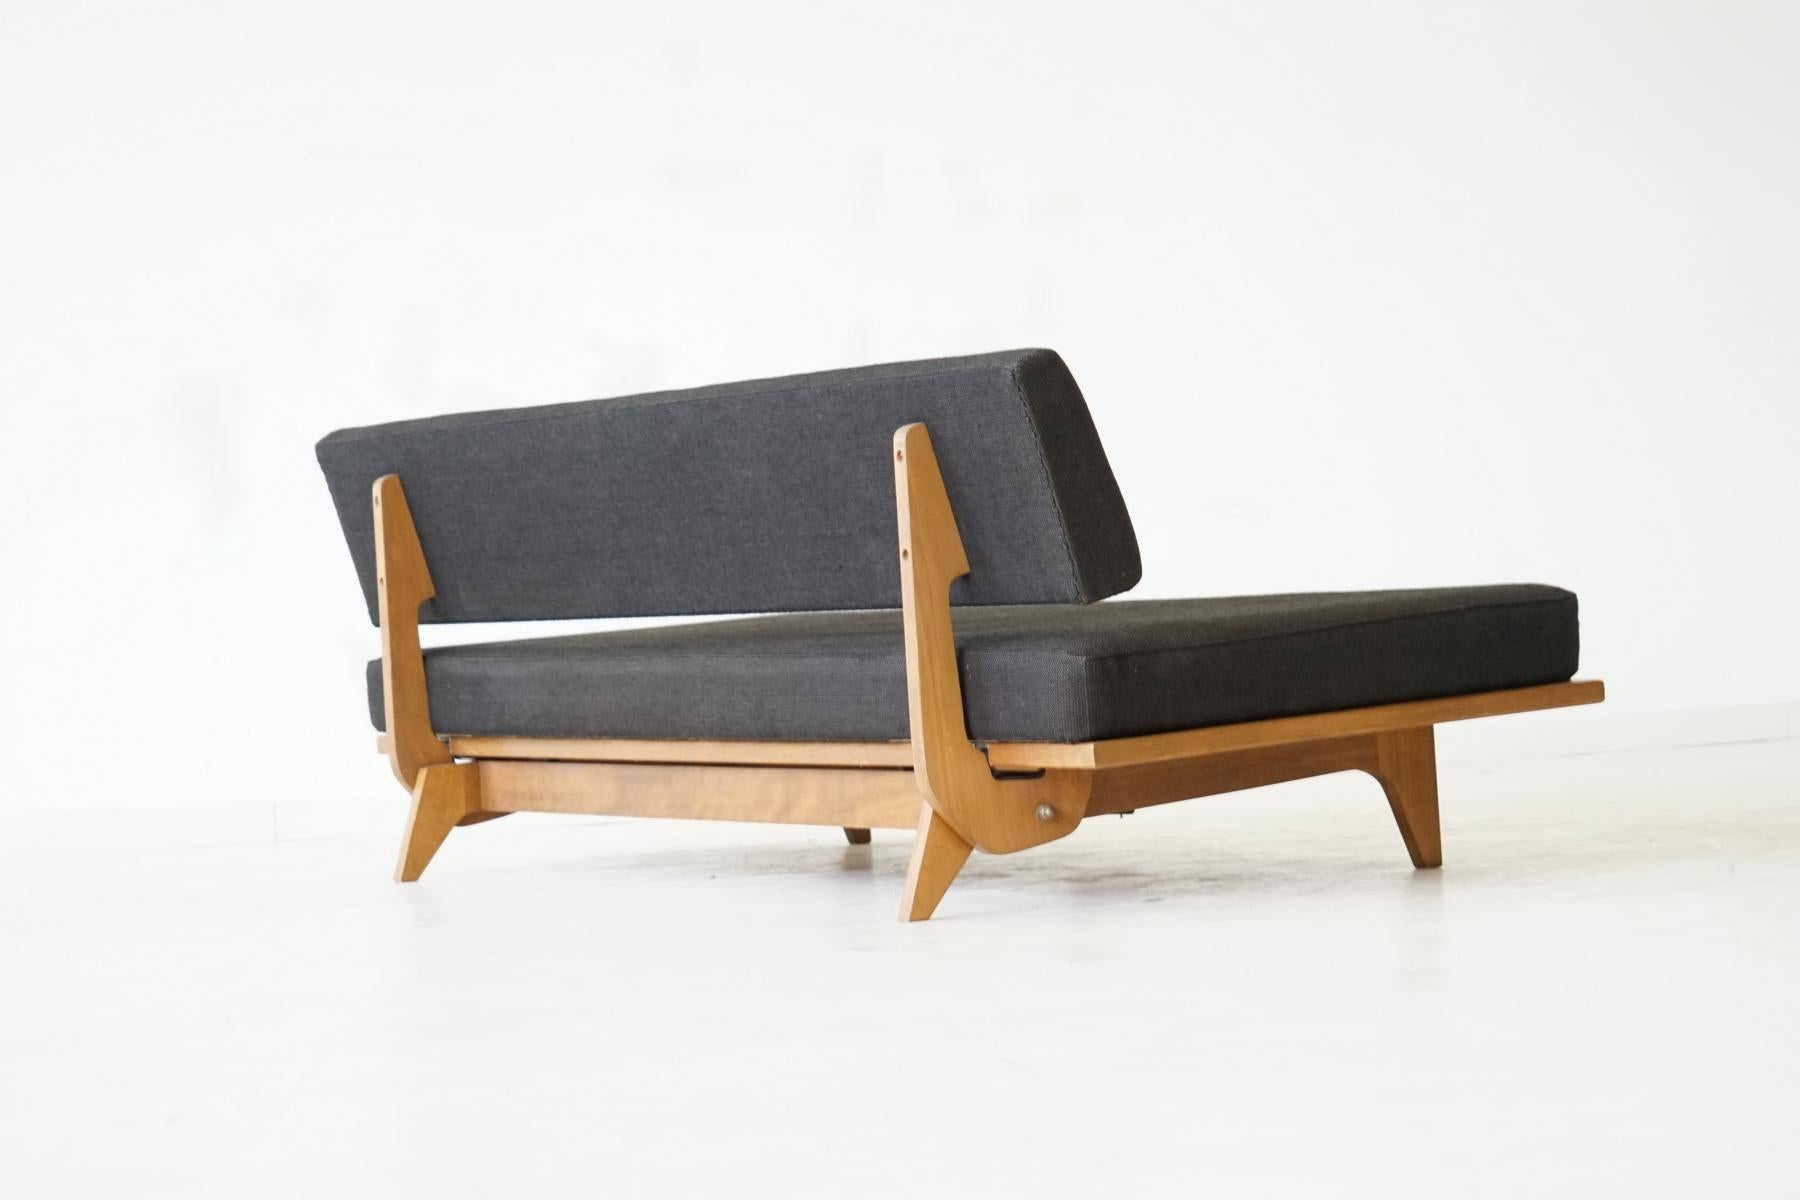 Mid-Century Modern Folding Sofa Daybed No. 700 by Richard Stein for Knoll International, 1947